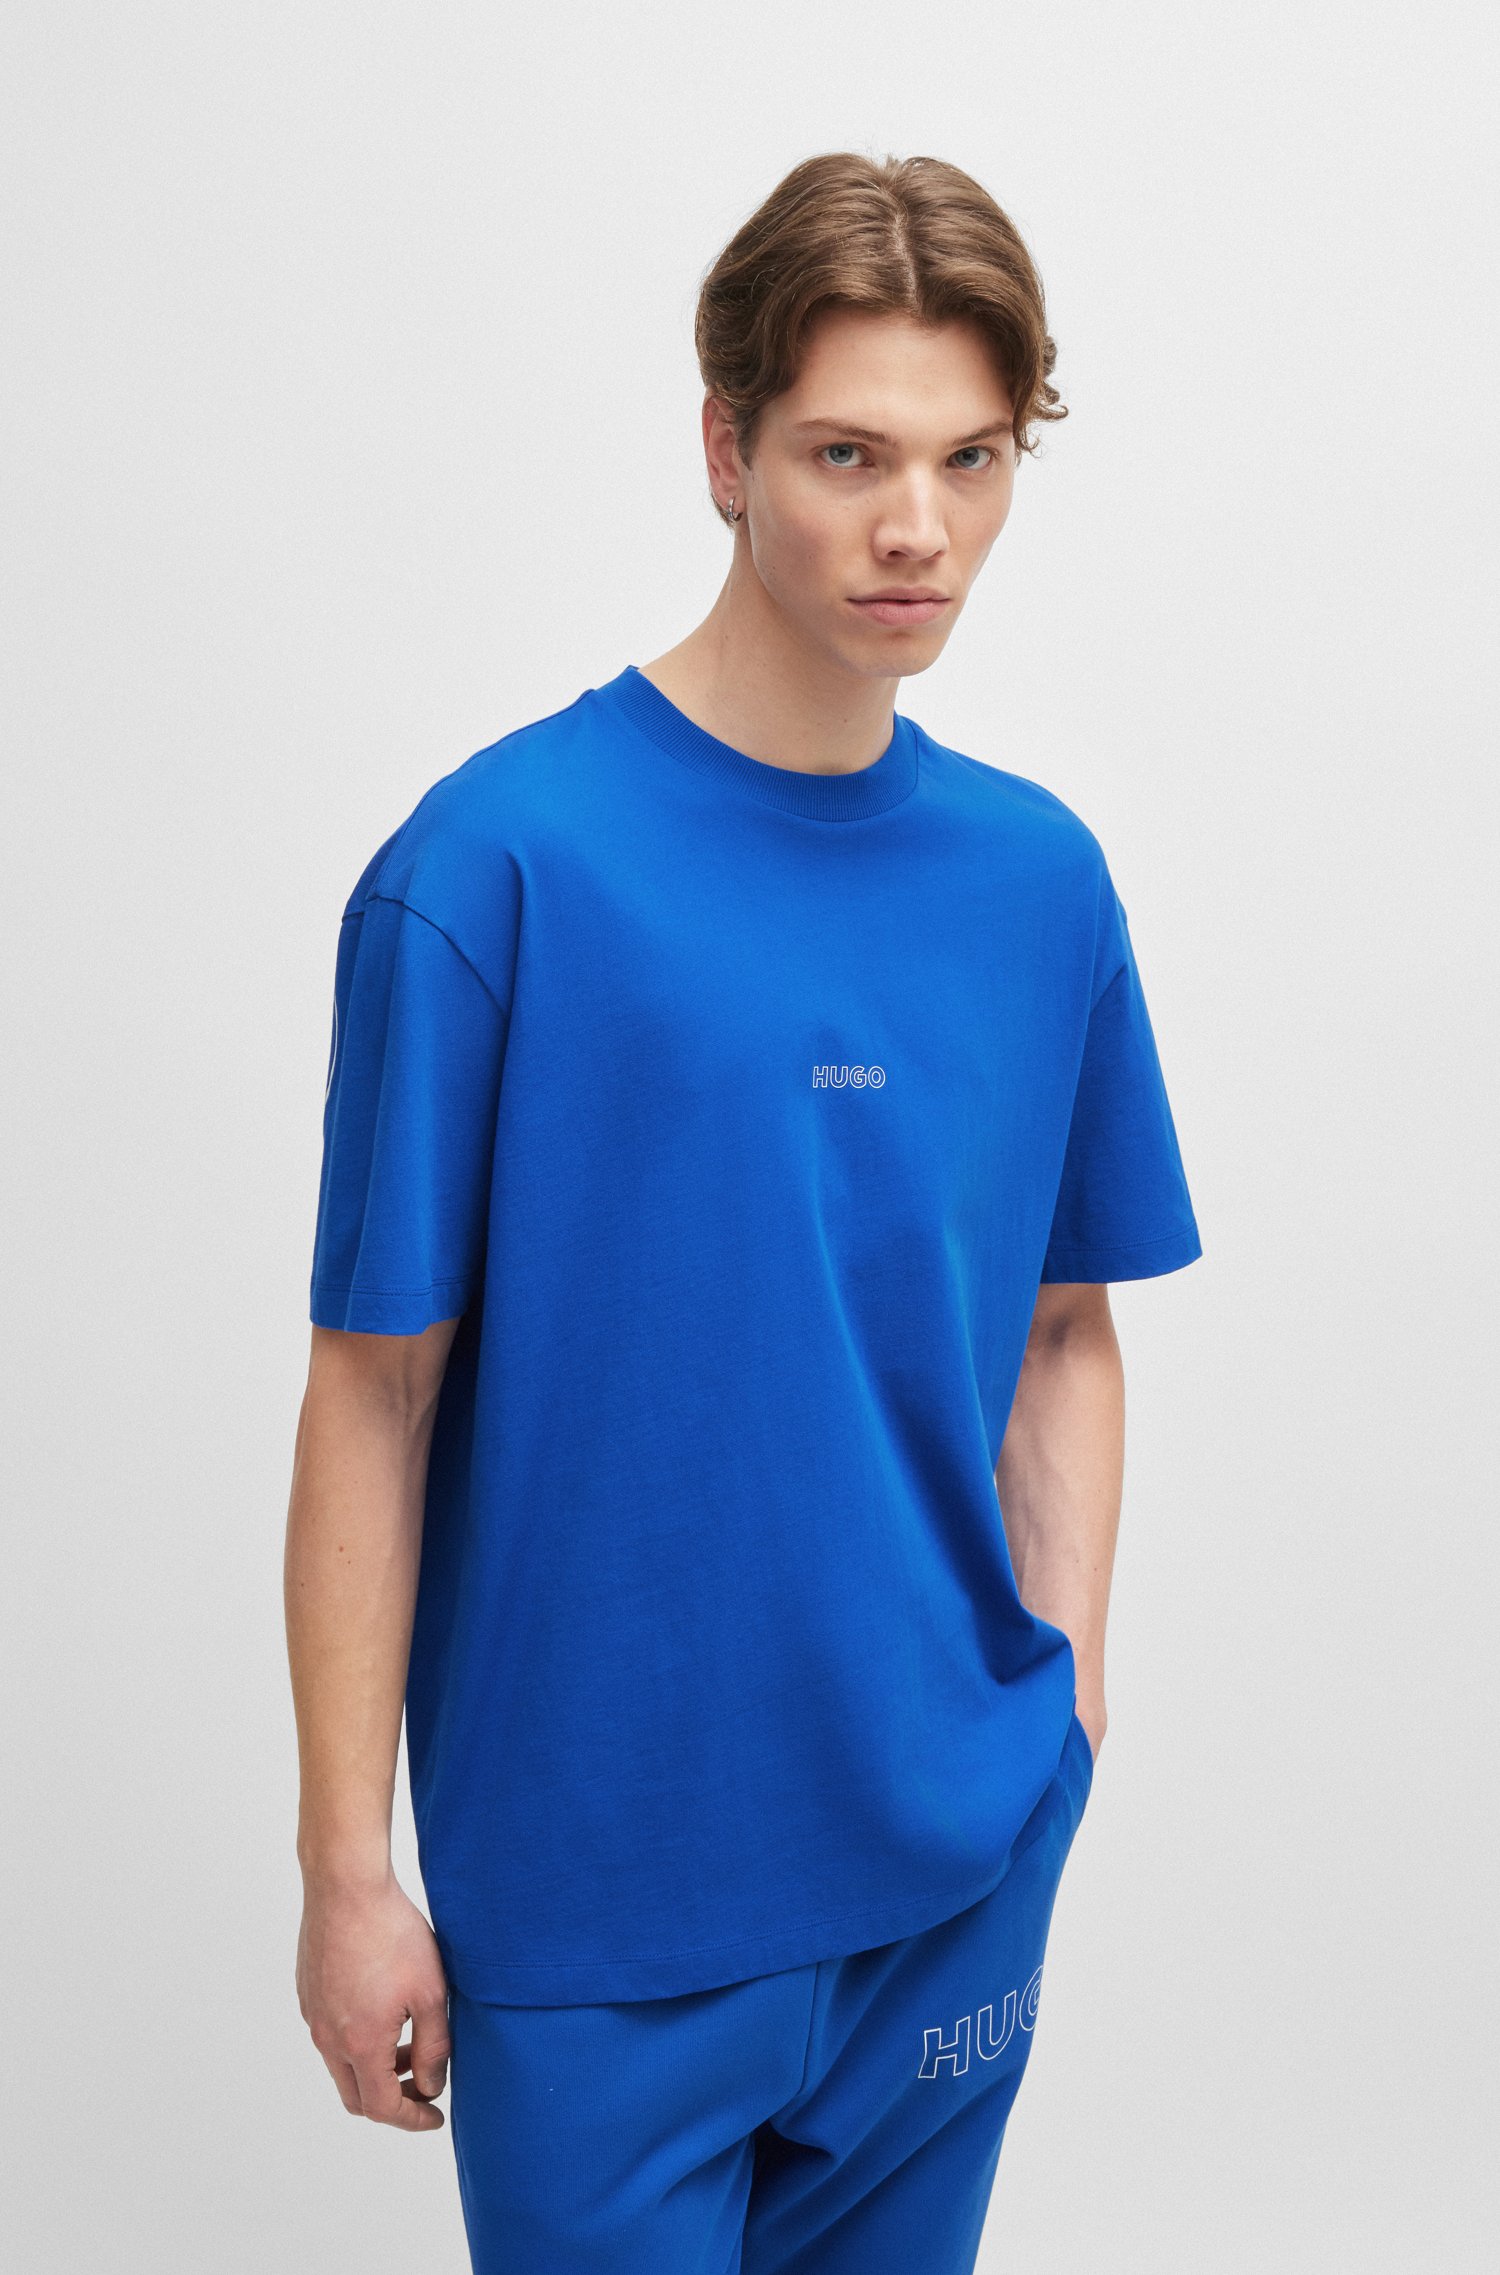 Cotton-jersey T-shirt with outline logos